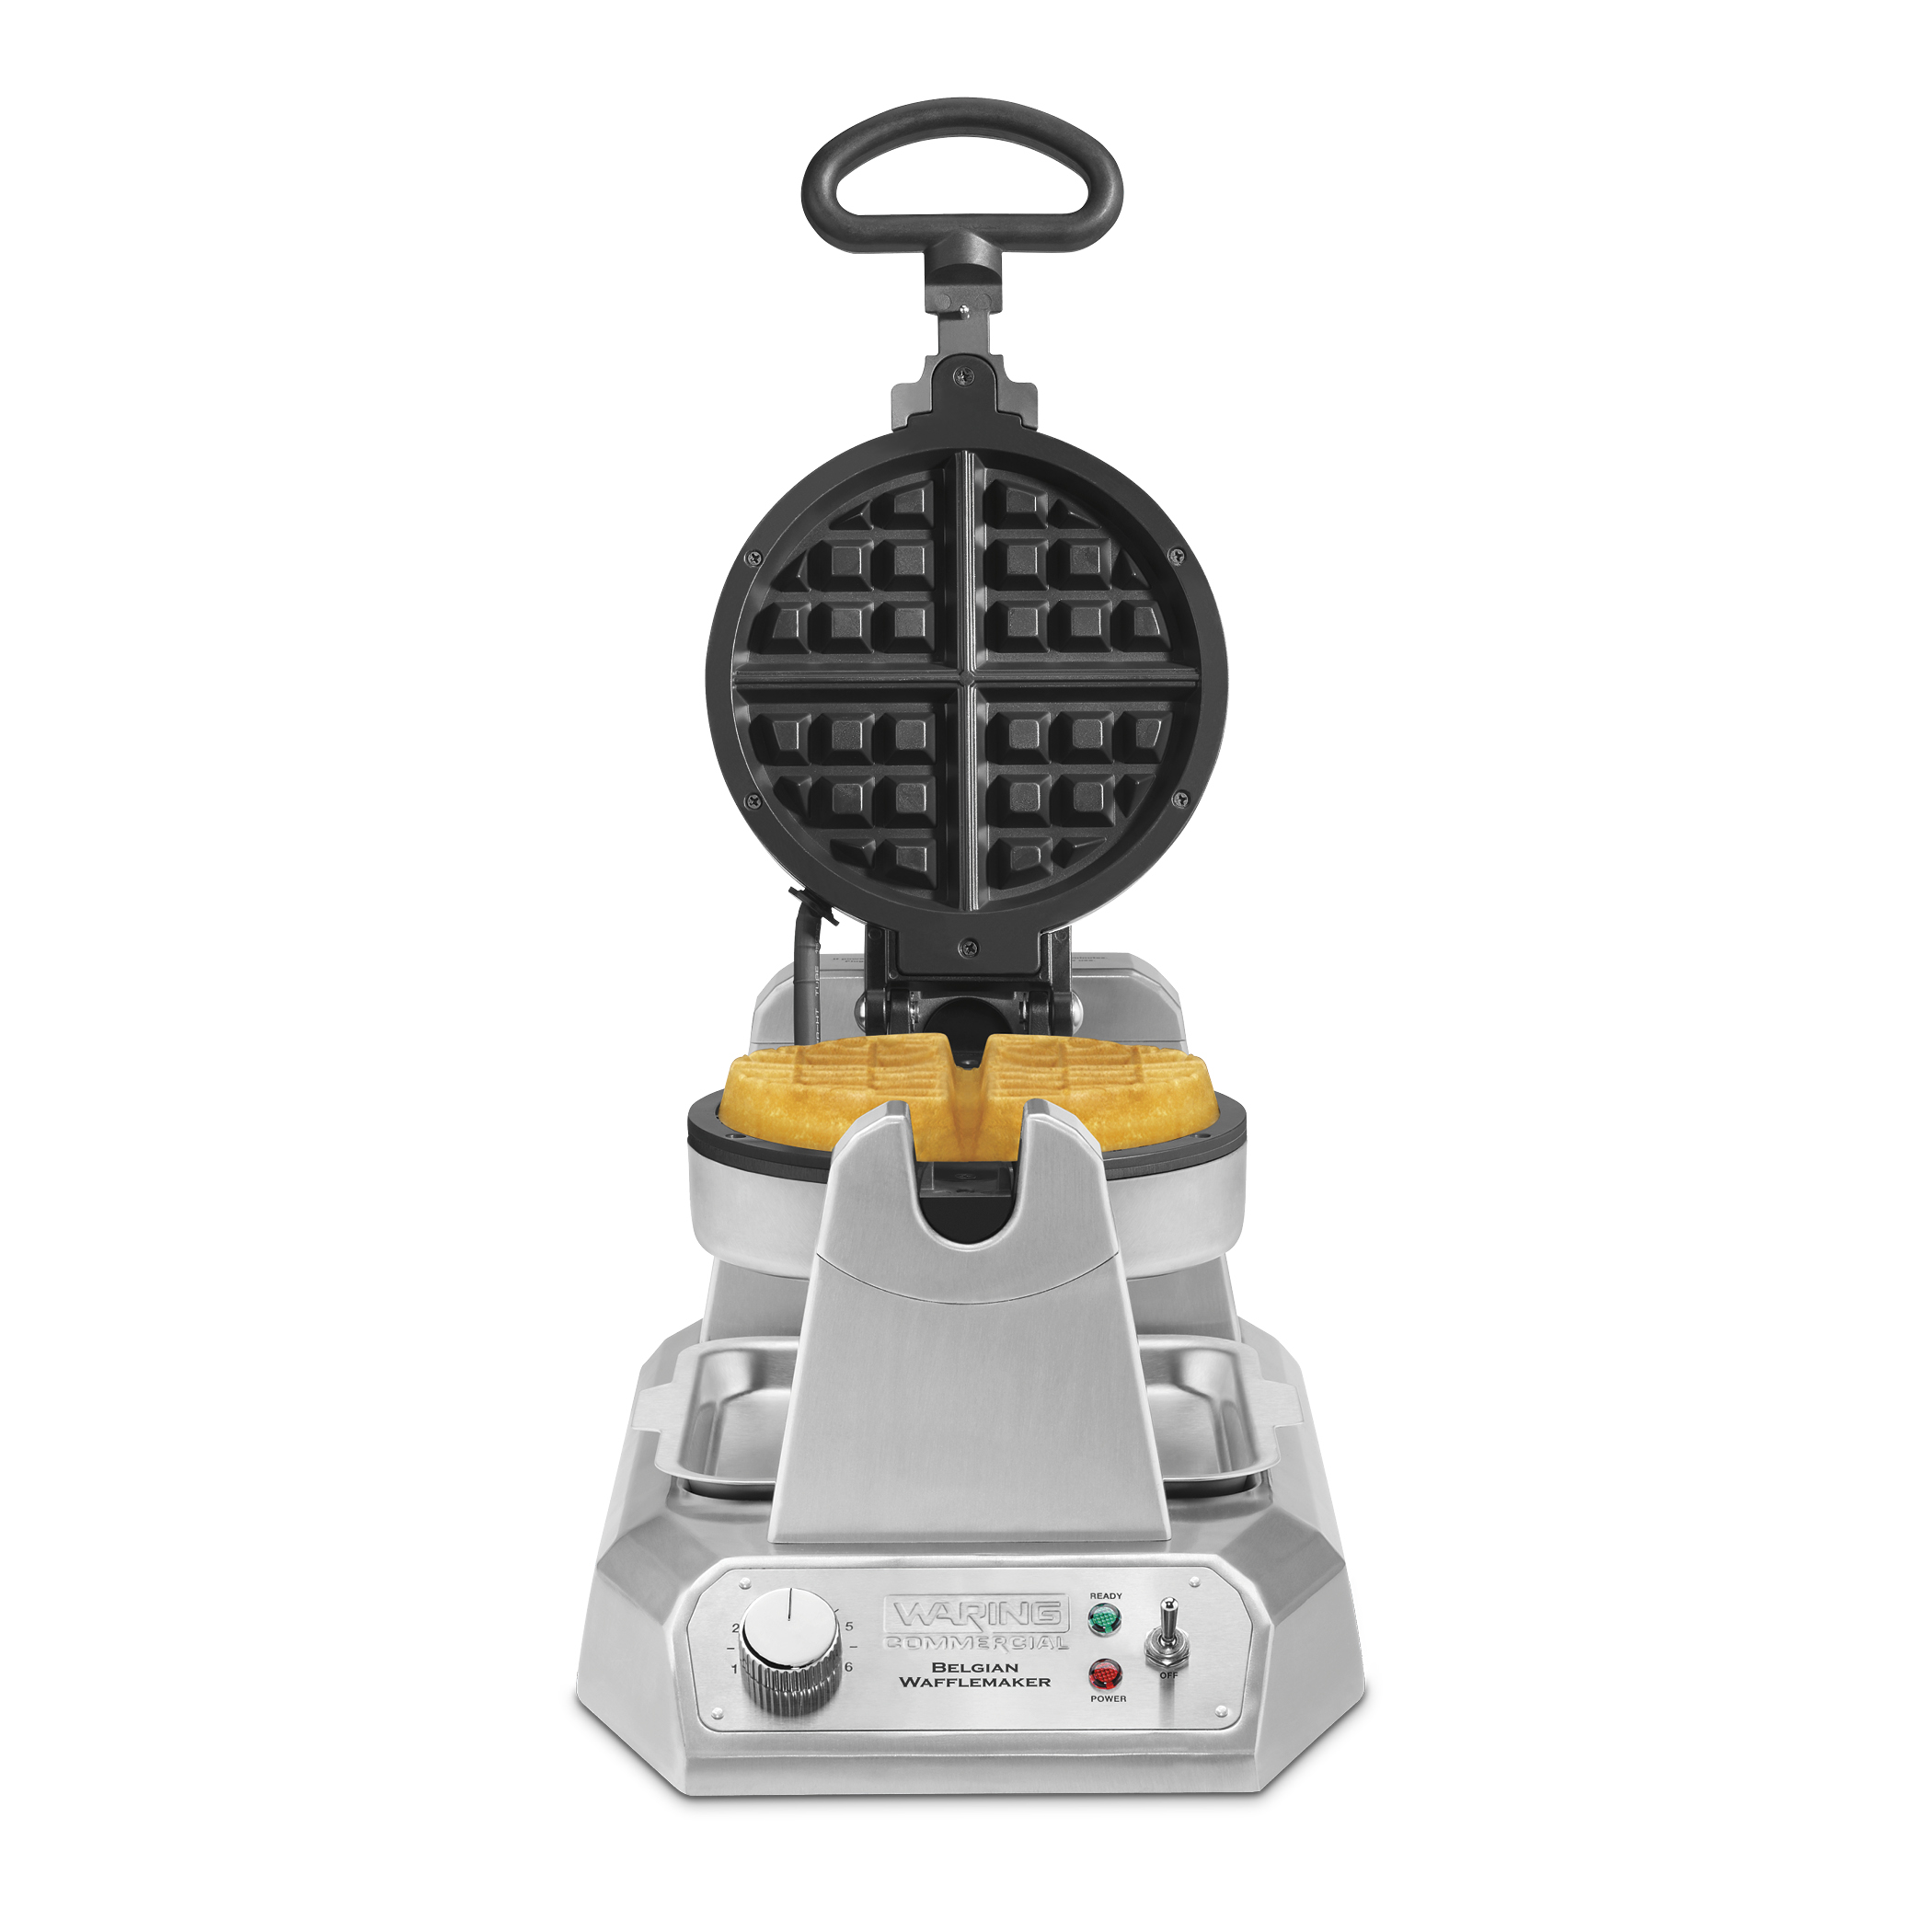 Single Head Stainless Steel Electric Waffle Maker - Buy Waffle  Maker,Electric Waffle Maker,Industrial Waffle Maker Product on